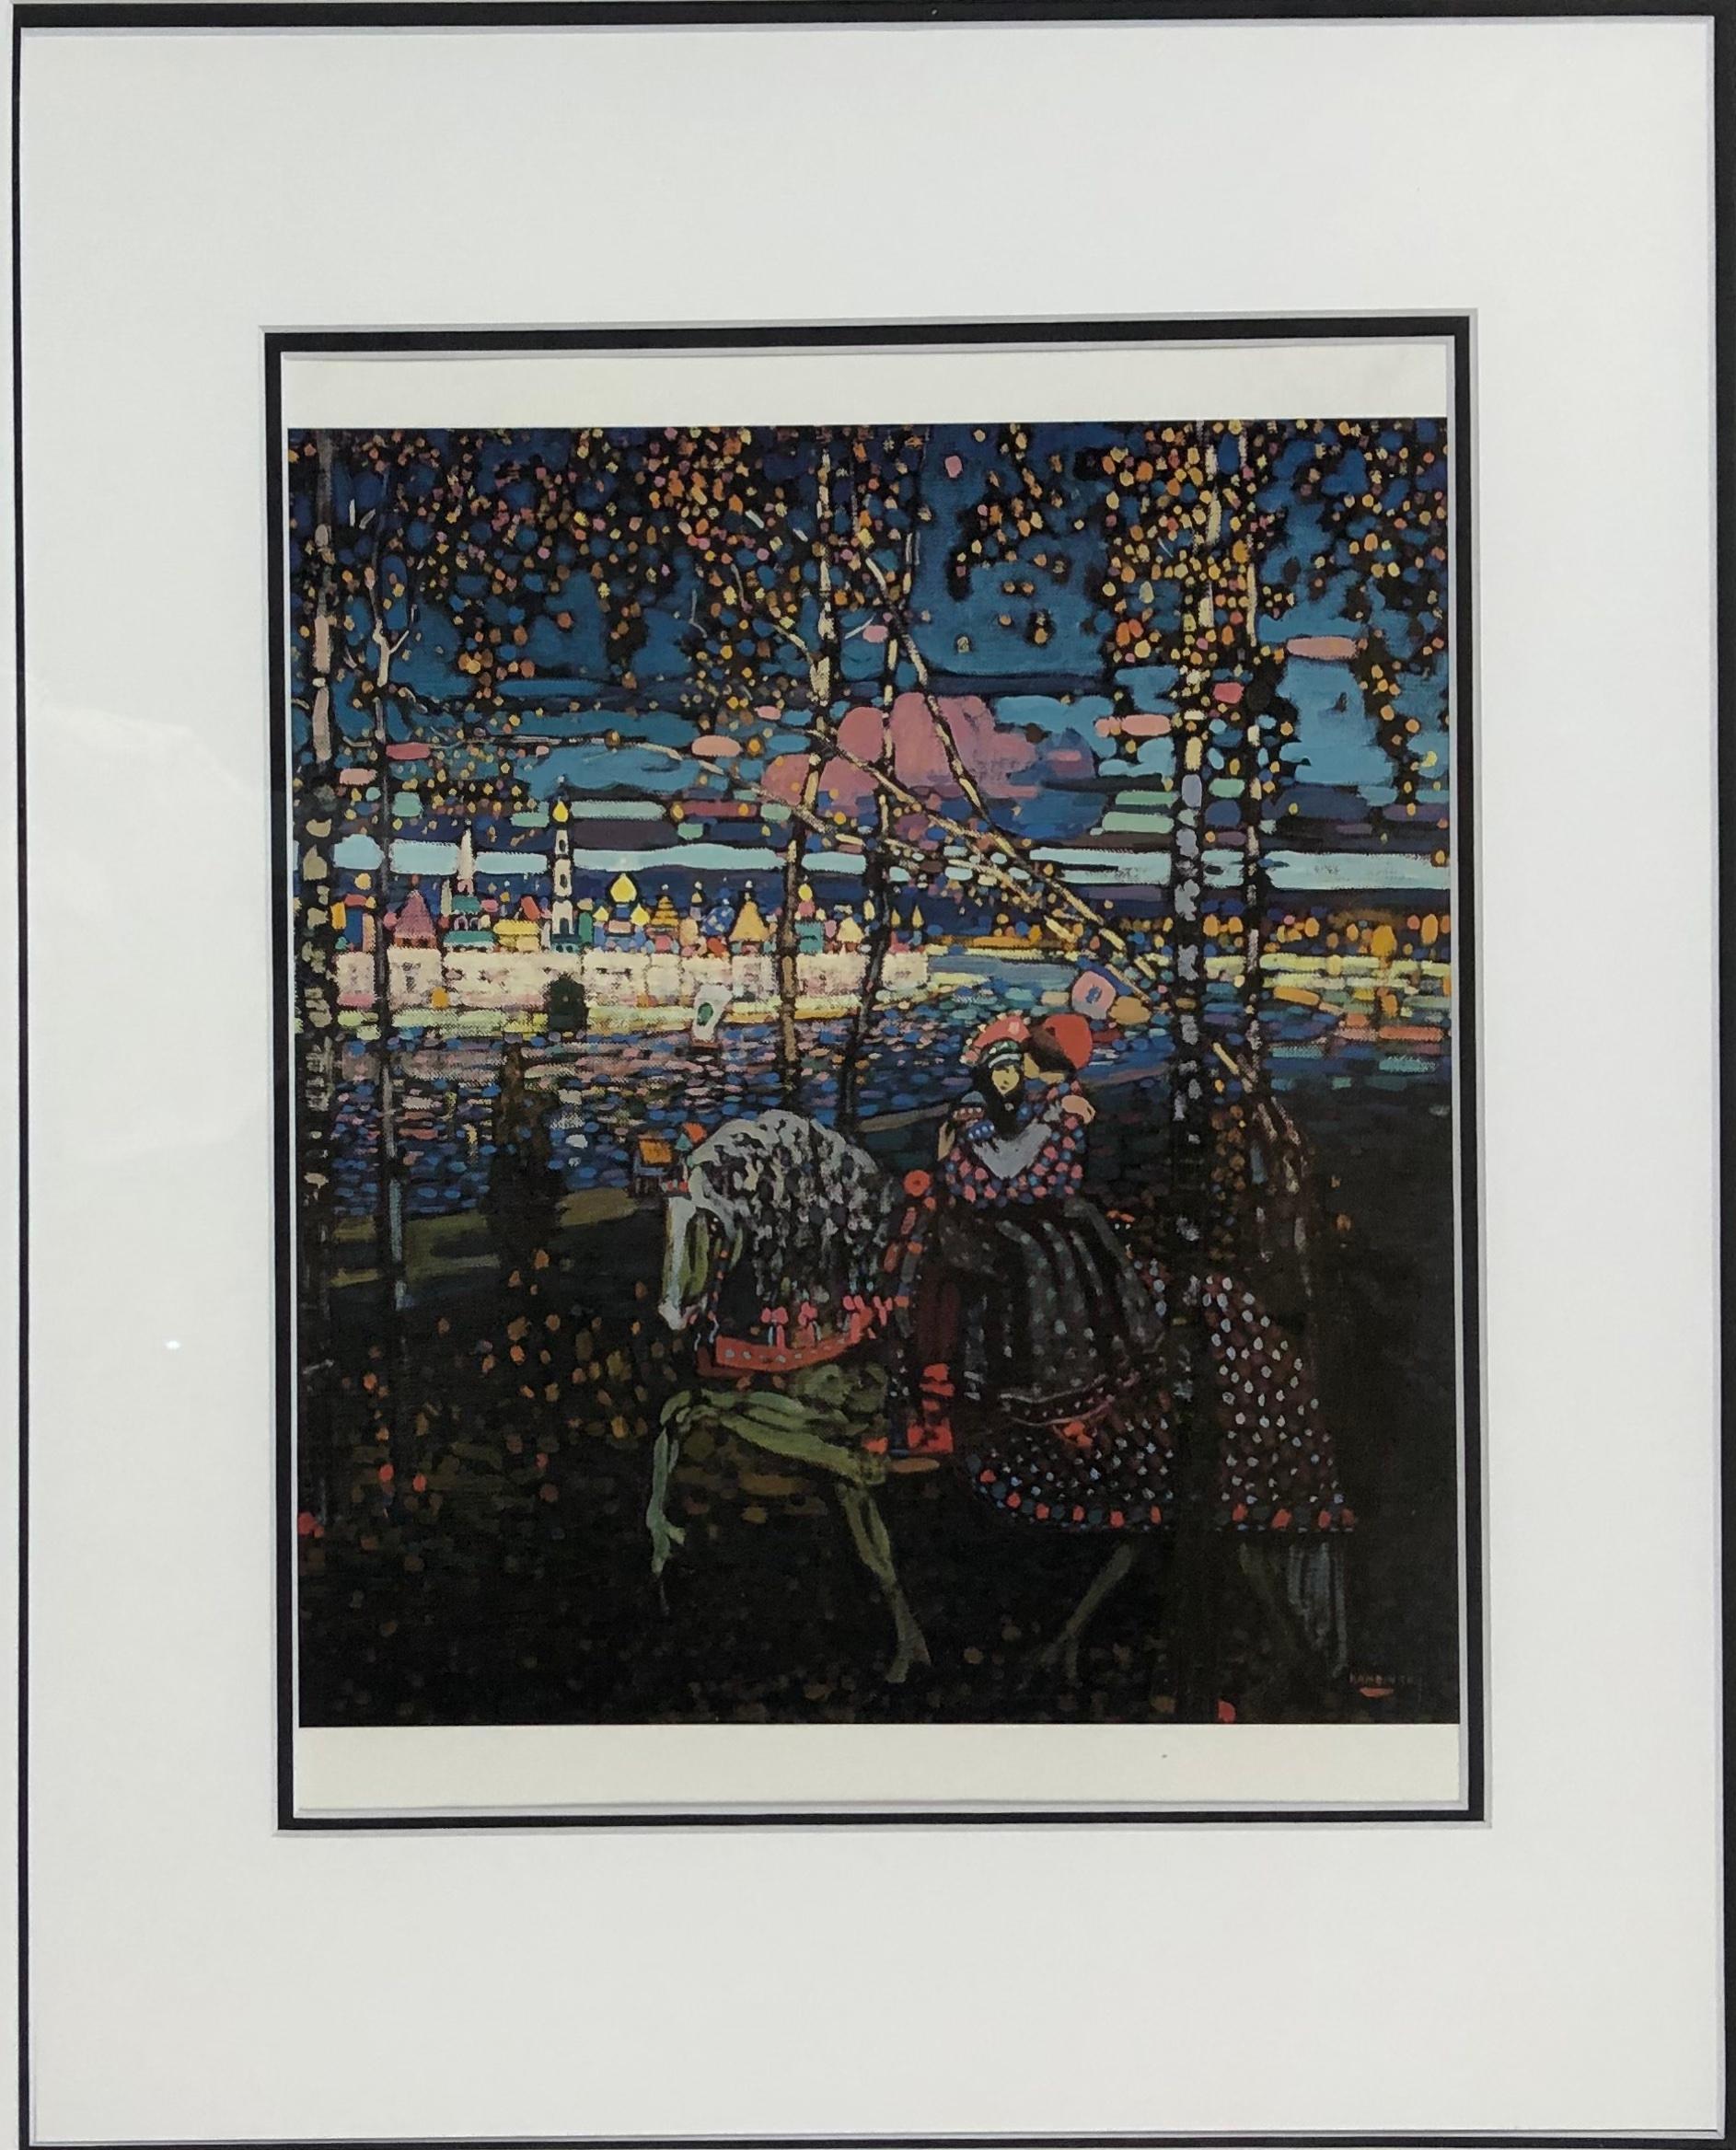 Wassily Kandinsky silk screen print.
Titled: Riding Couple, original painted in 1906, harmonious and perfect form among geometrical shapes.

This from the 1990 edition published in homage to Wassily Kandinsky by 
Publisher: Benedikt Taschen in